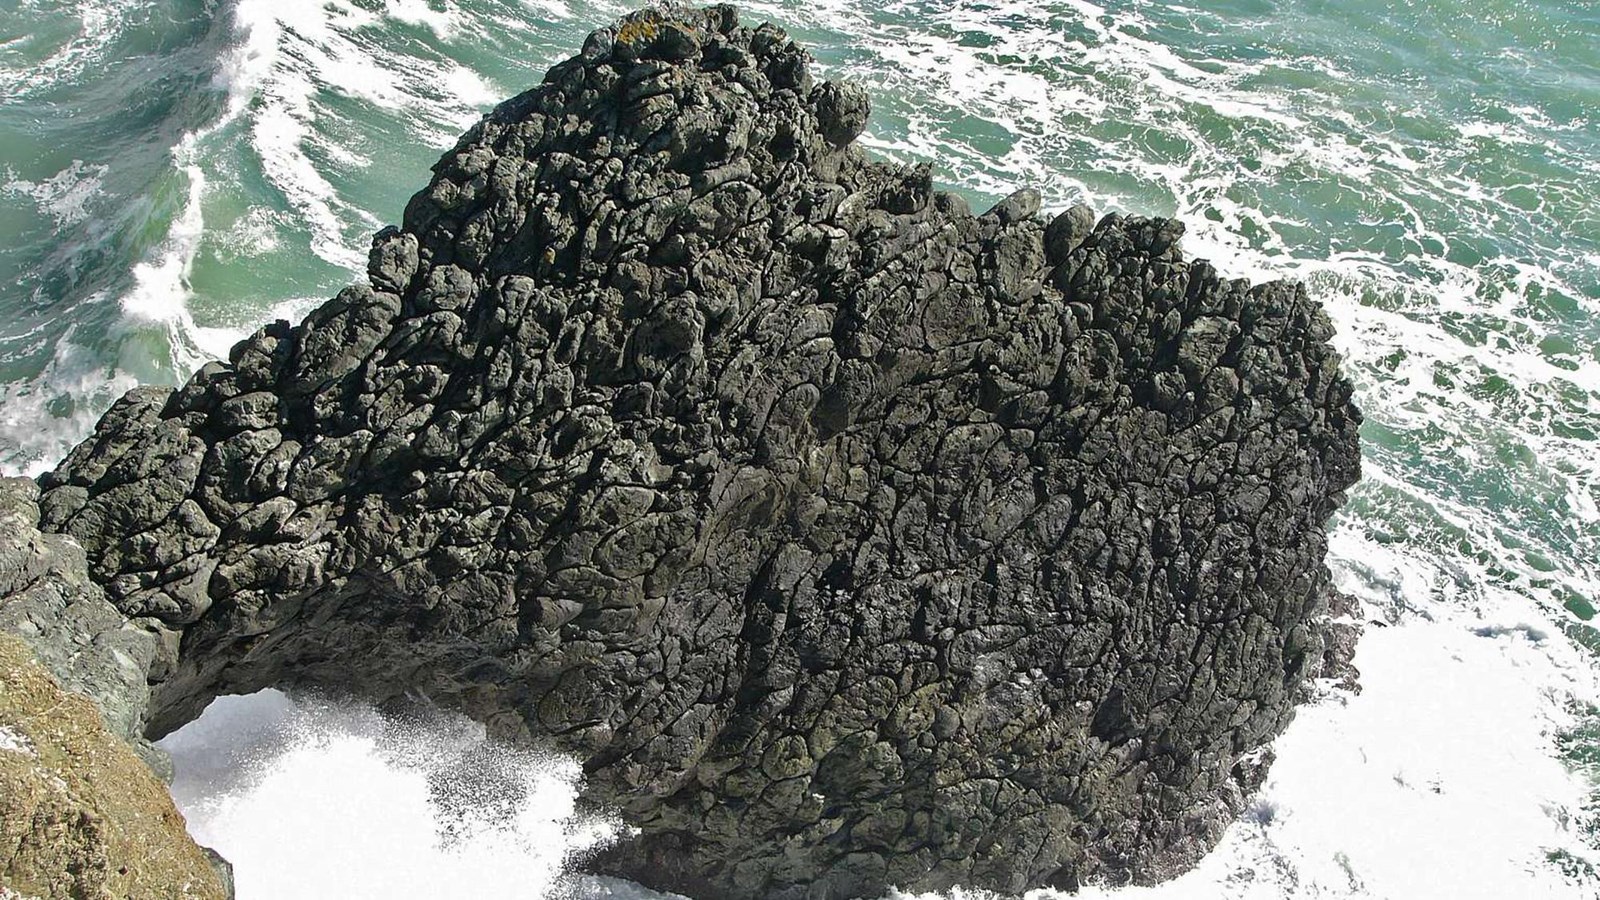 Pillow basalt arch with waves washing around it at Point Bonita seen from above.